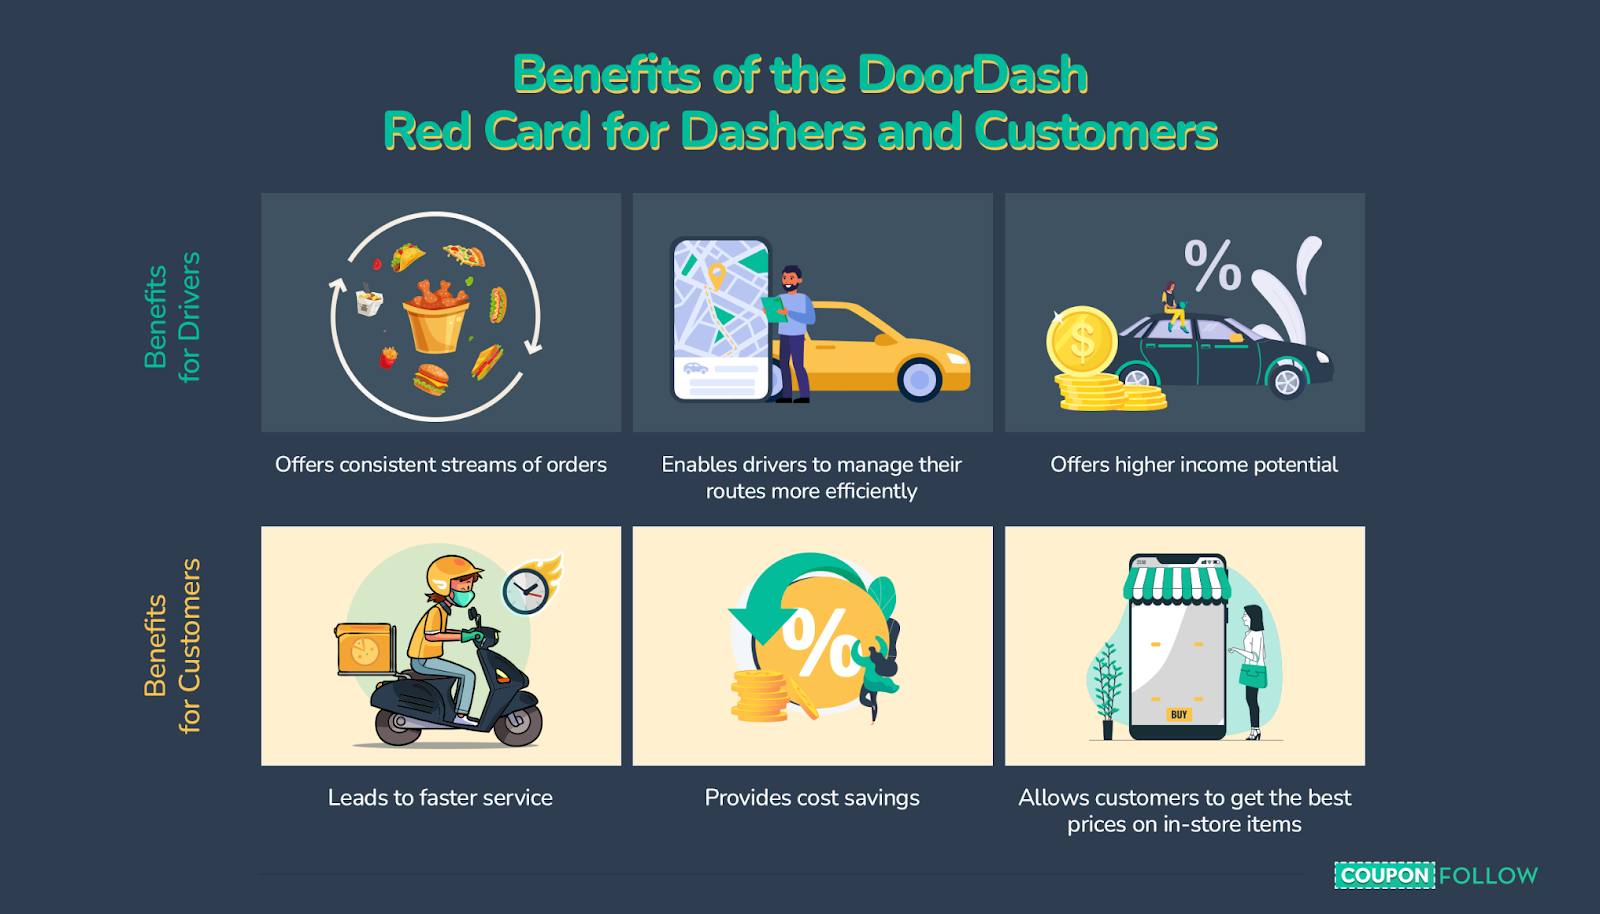 Image showing the different benefits of a DoorDash Red Card for drivers and customers